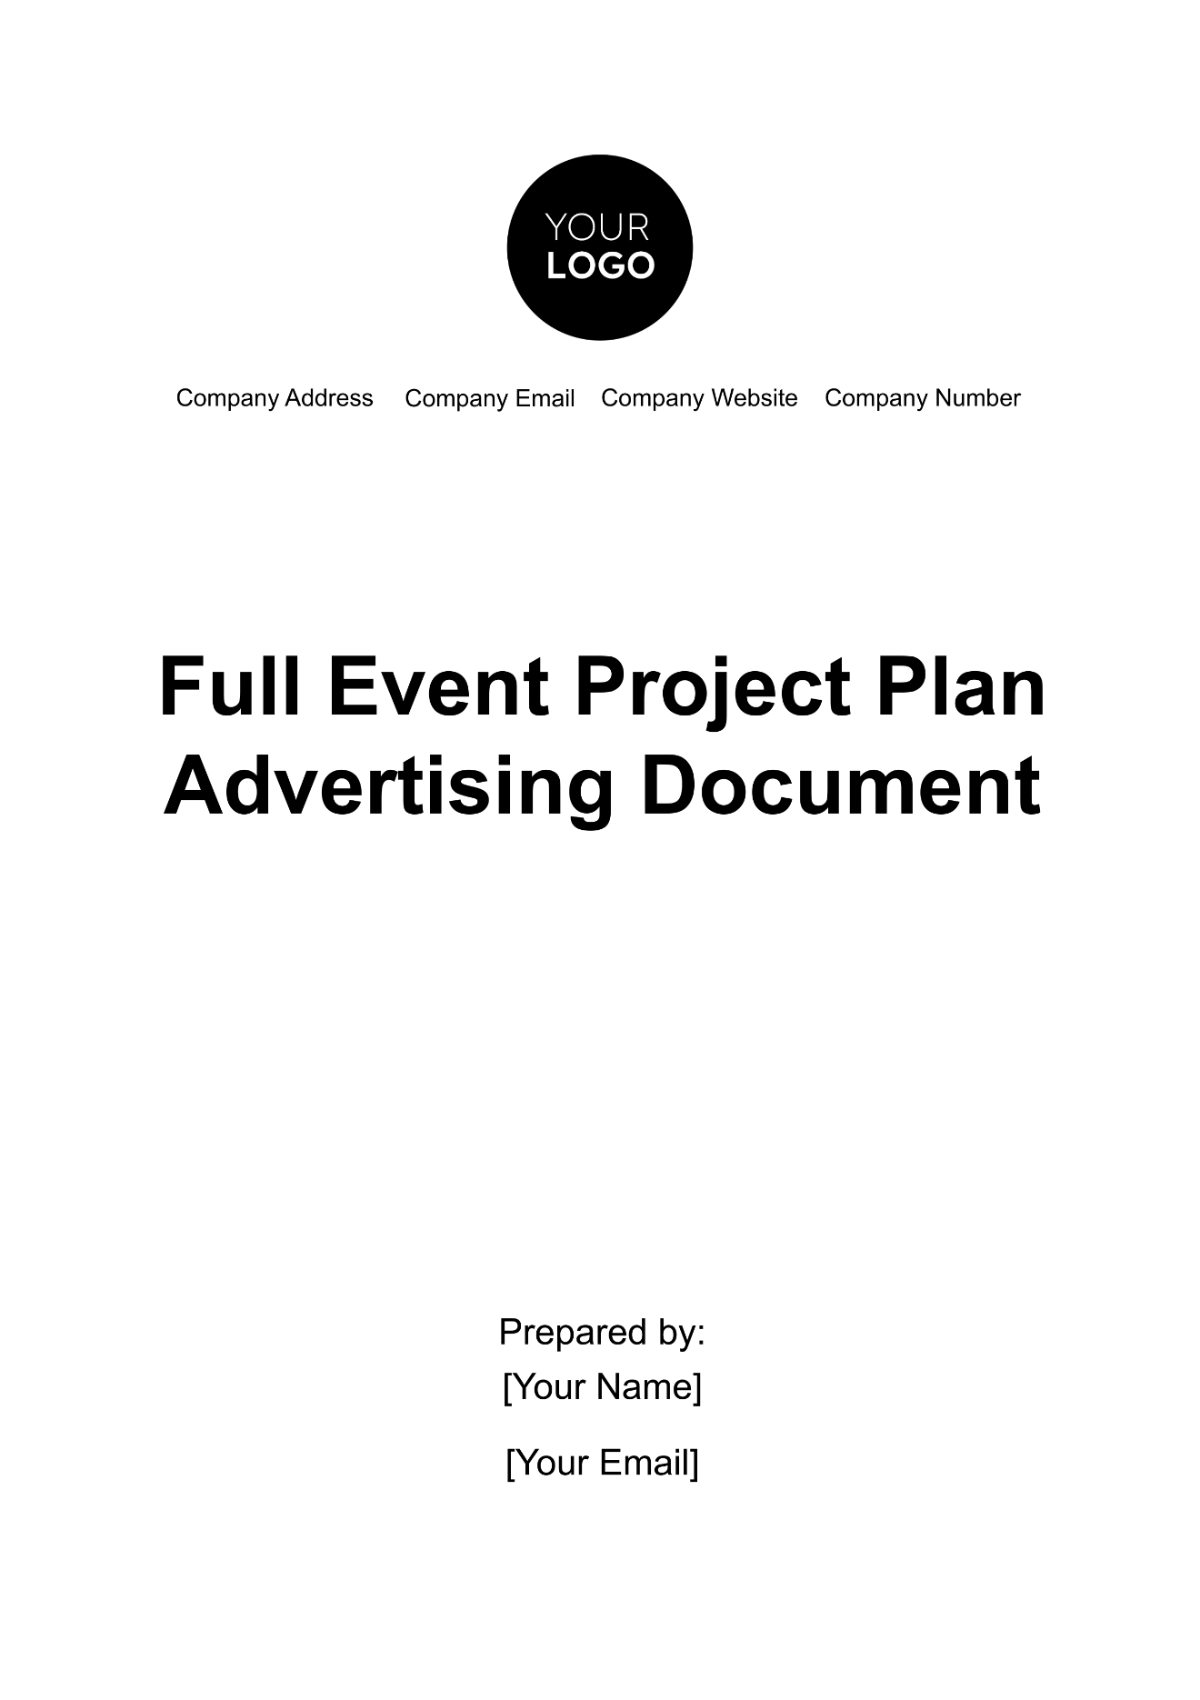 Free Full Event Project Plan Advertising Document Template